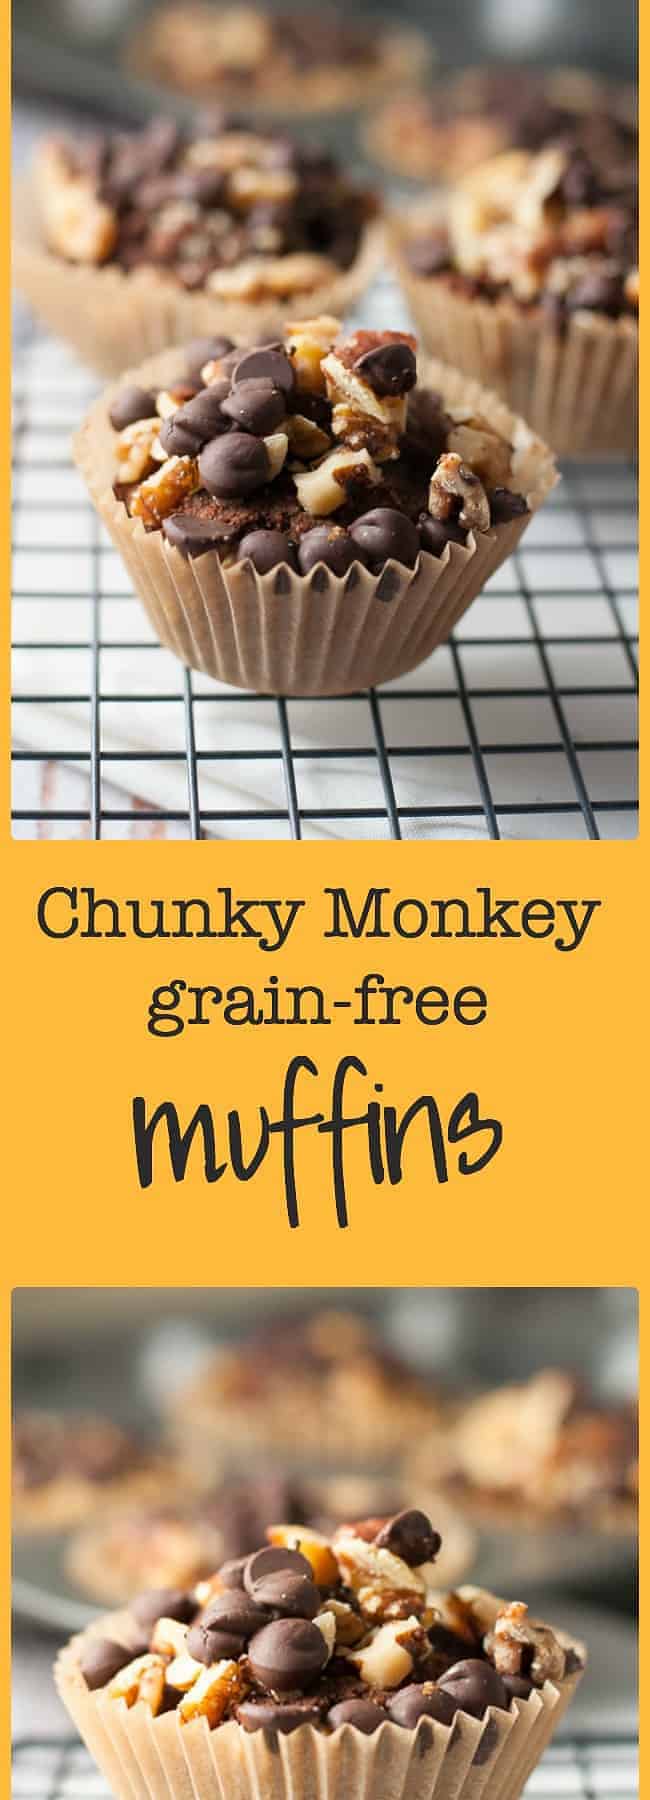 Chunky Monkey Grain-free Muffins. No grains, no dairy. Just a yummy muffin made with bananas, almond butter, dates and cocoa and topped off with walnuts and chocolate chips. All our favourite flavours together in one healthy muffin.